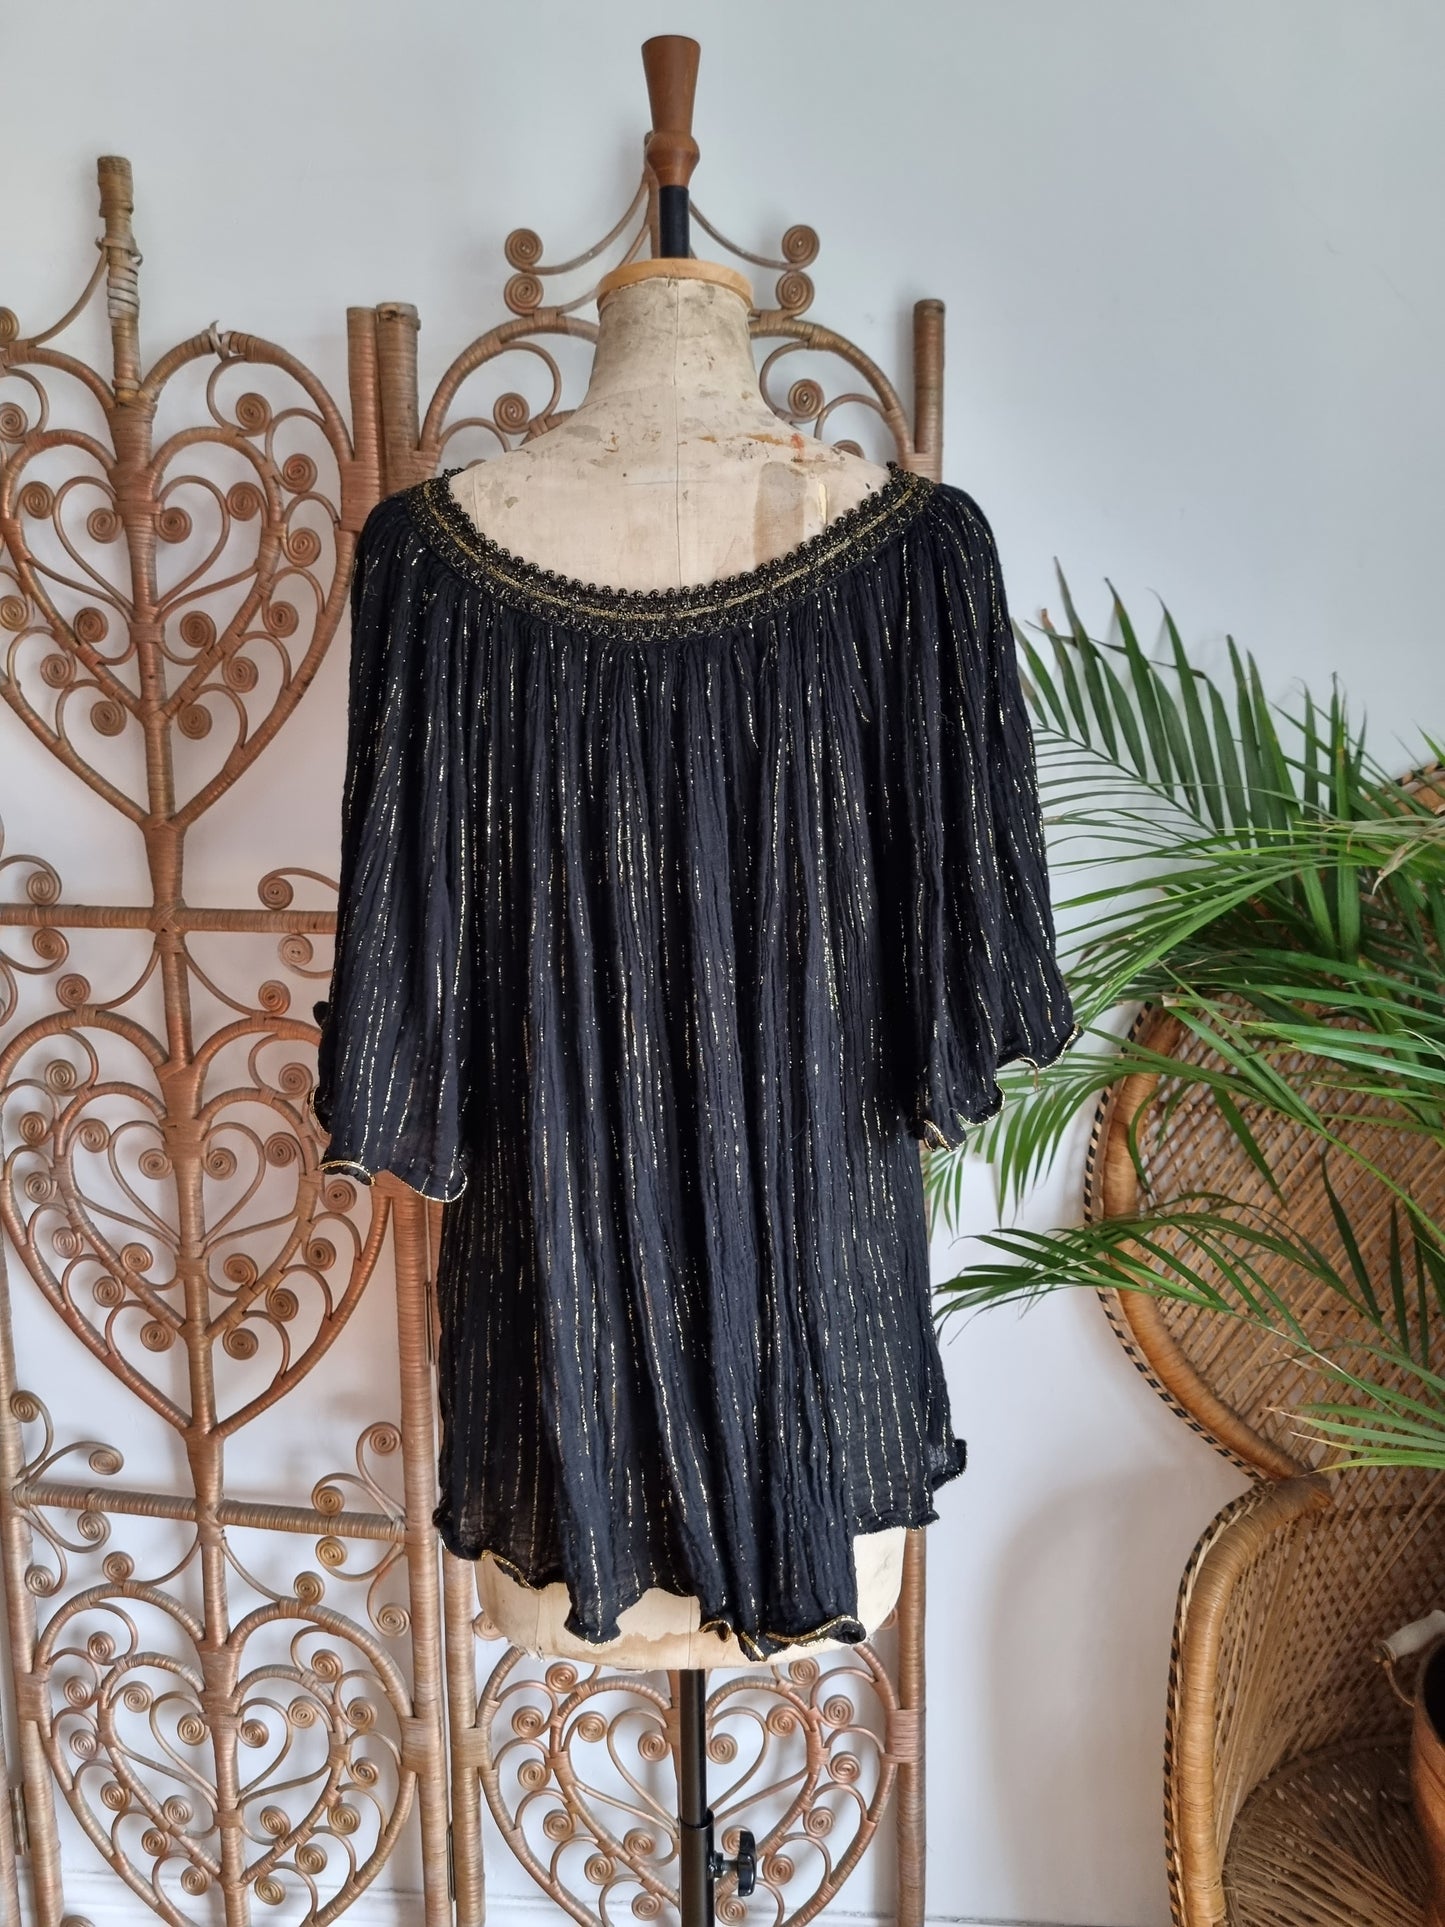 Vintage cheesecloth tunic blouse